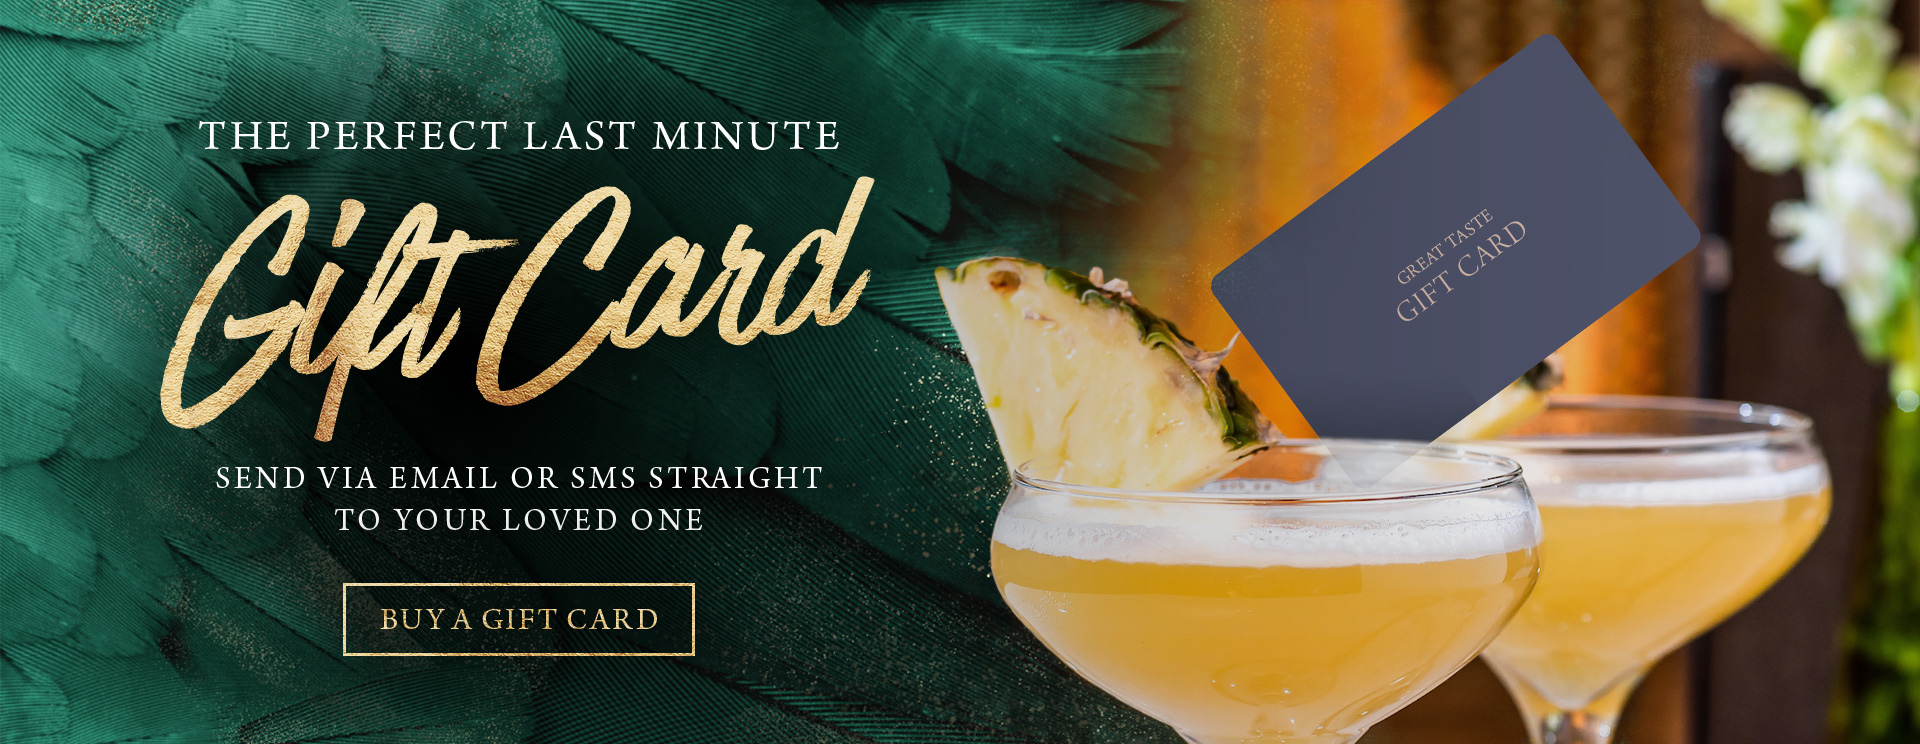 Give the gift of a gift card at The Belvedere Arms